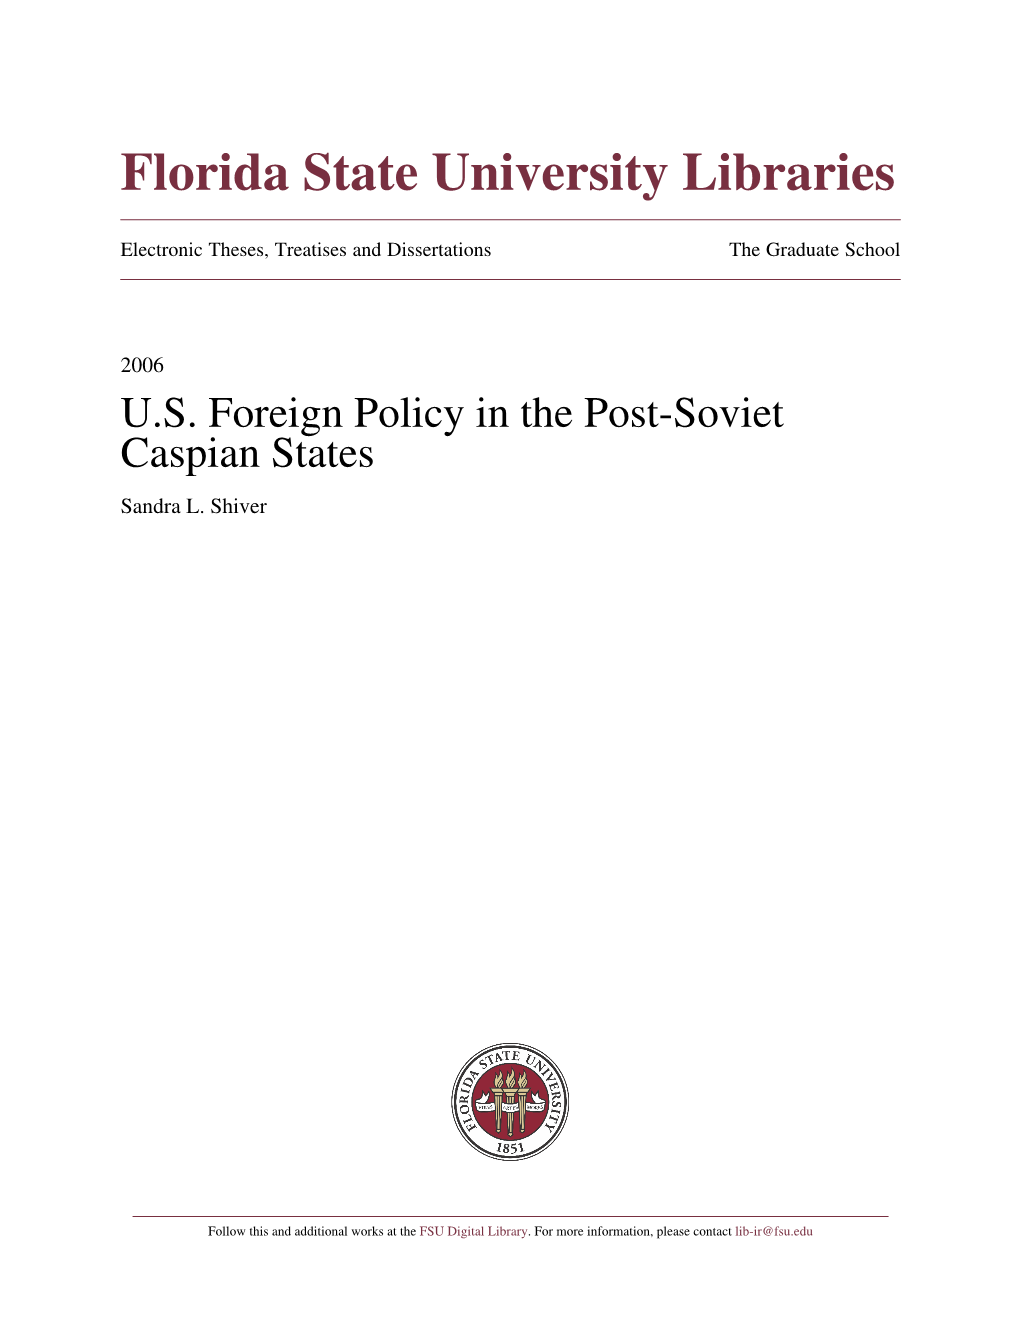 U.S. Foreign Policy in the Post-Soviet Caspian States Sandra L